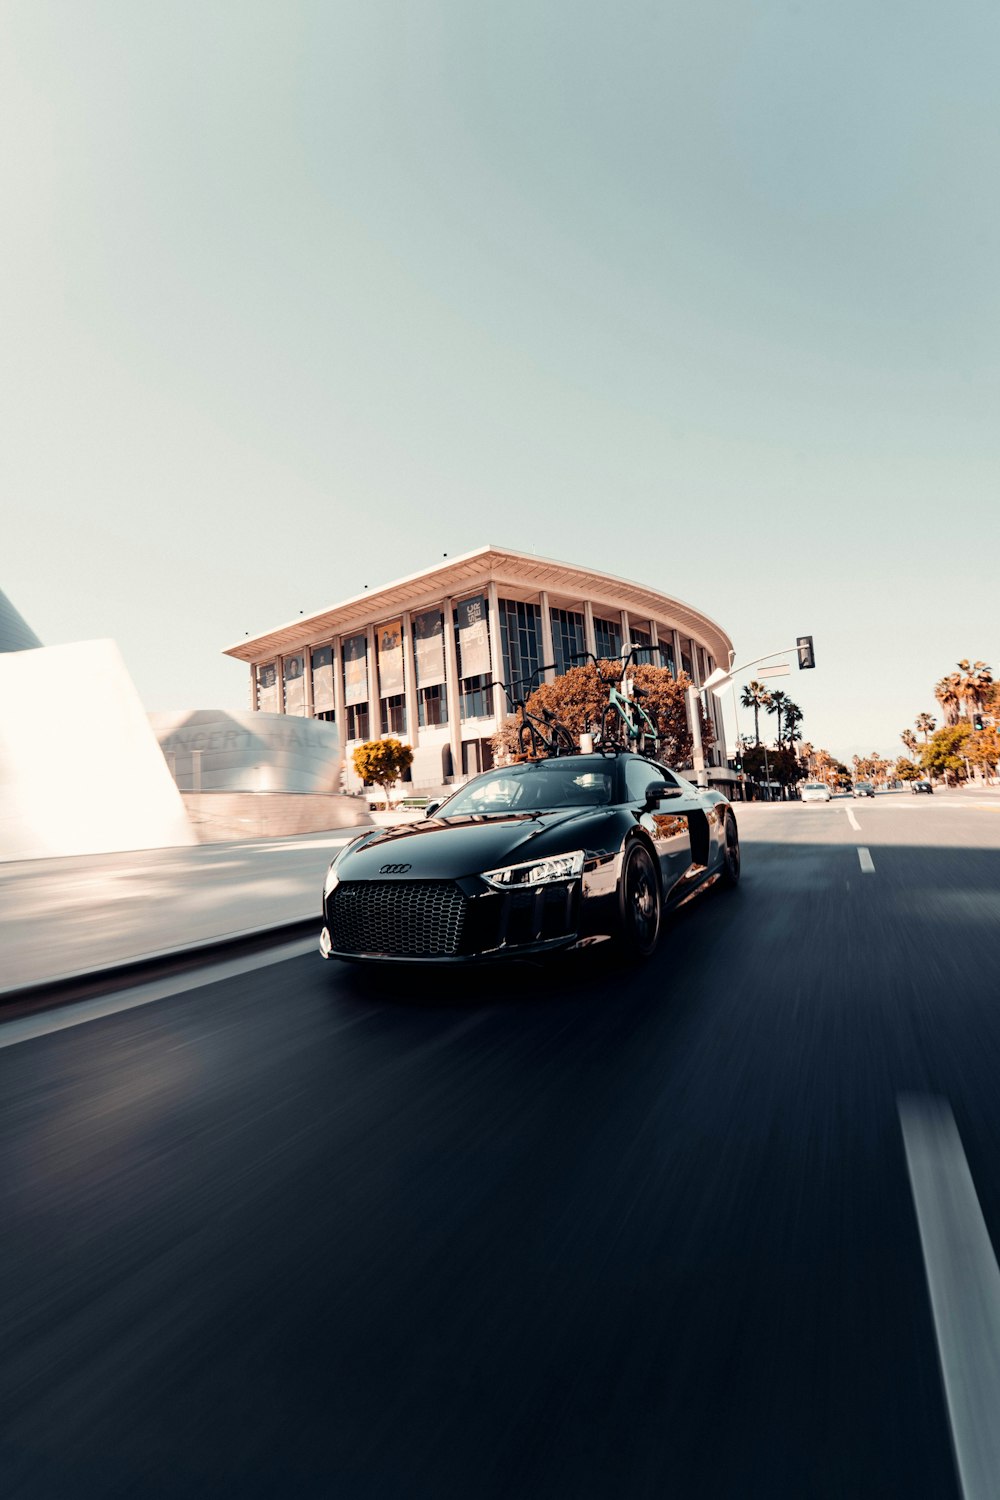 a black sports car driving on a road in front of a building